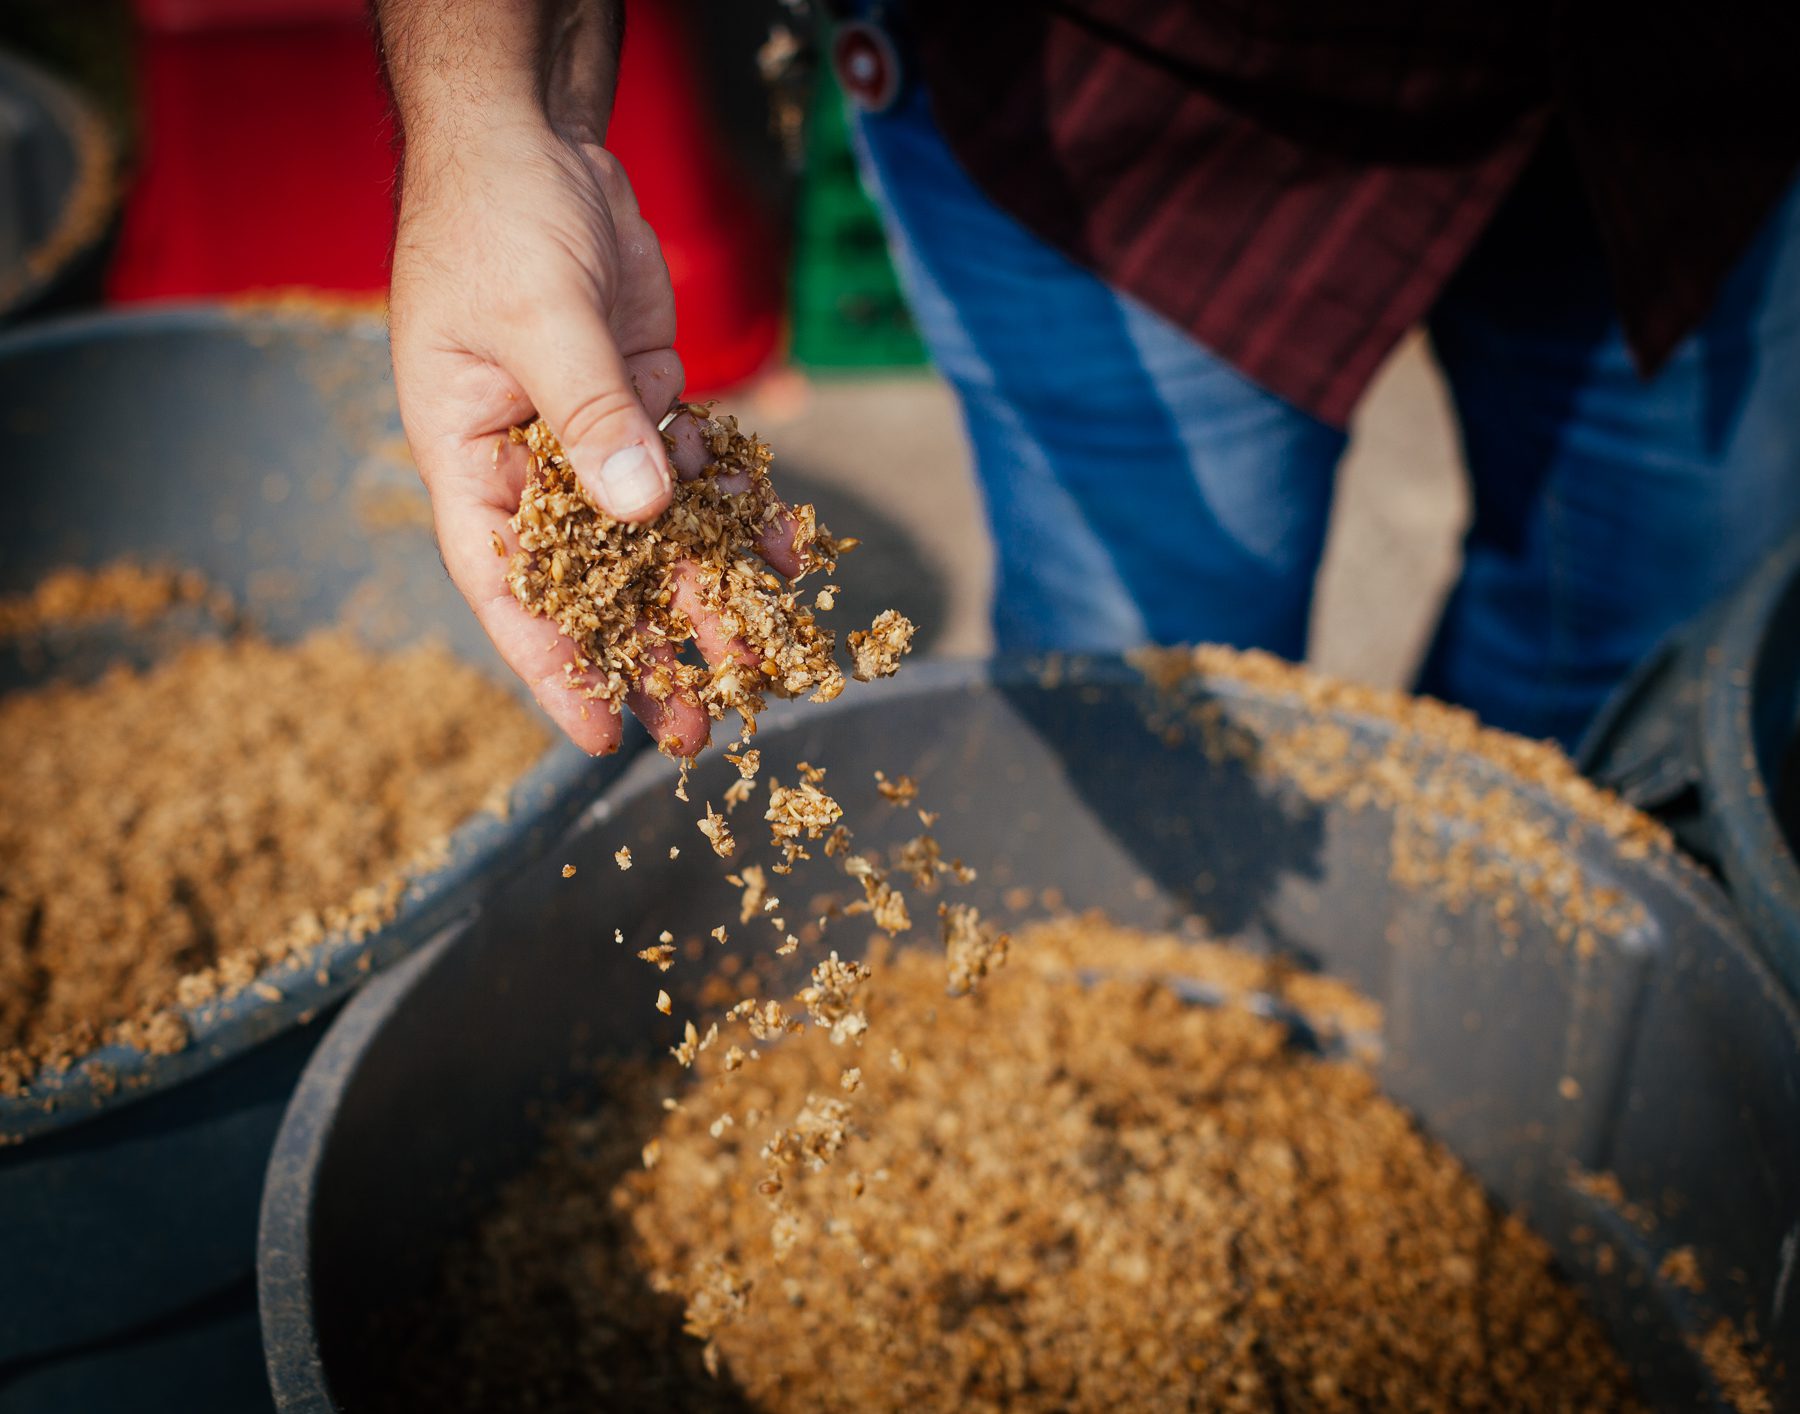 In an attempt to be more sustainable, all of the spent grains from the completed mash at Breakwall Brewery go to local farmers as cattle and hog feed.